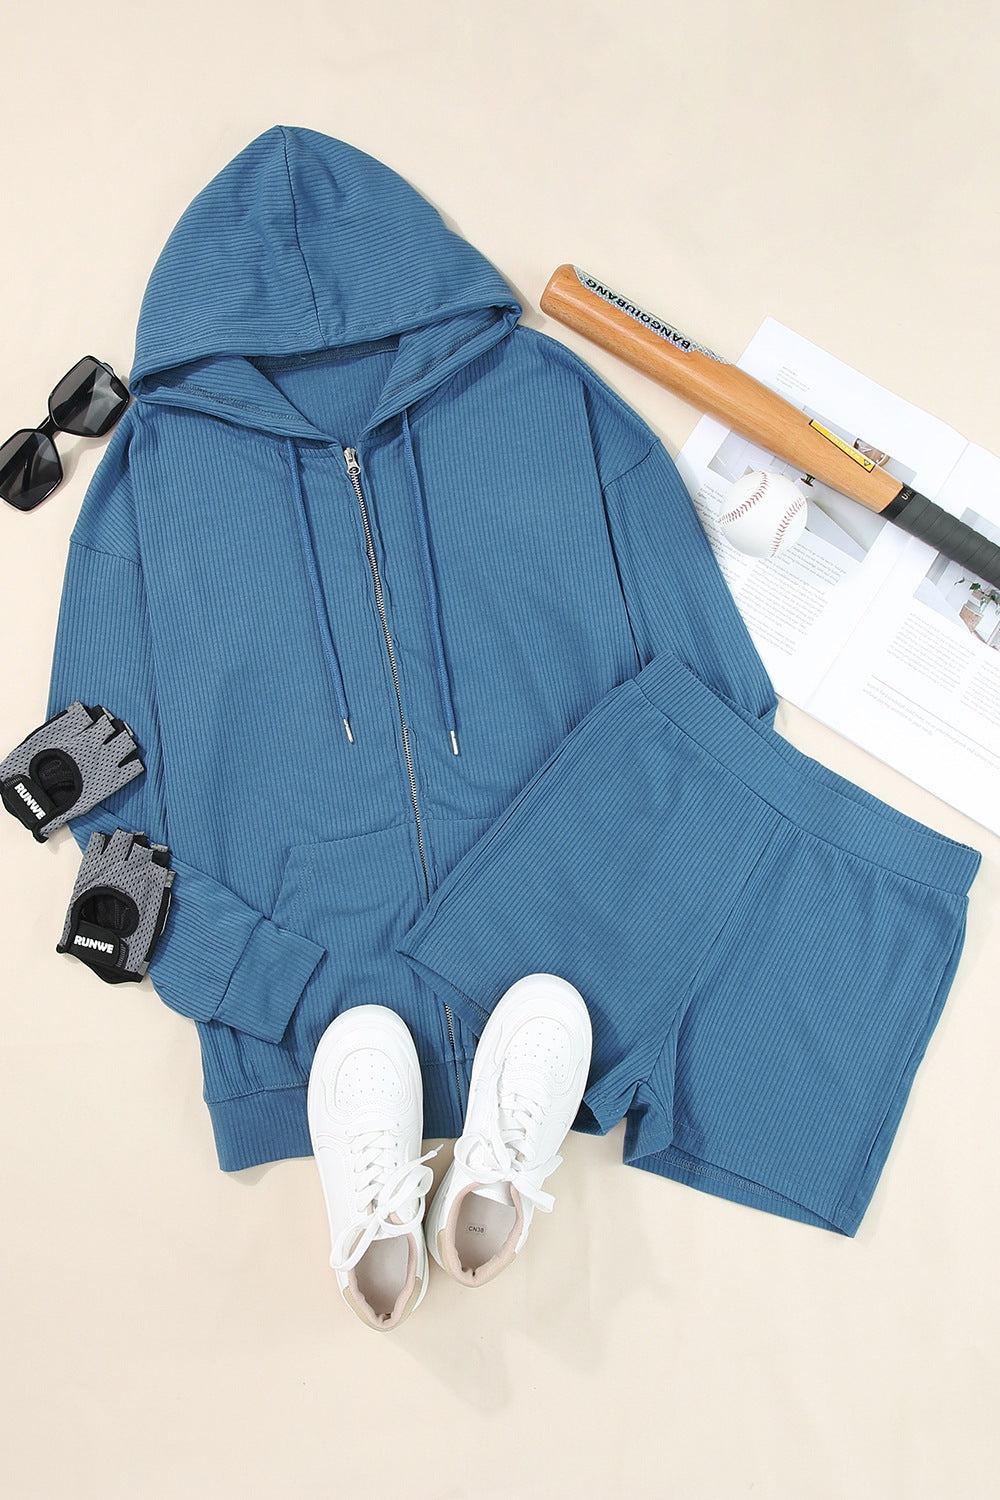 a pair of white tennis shoes and a blue hoodie